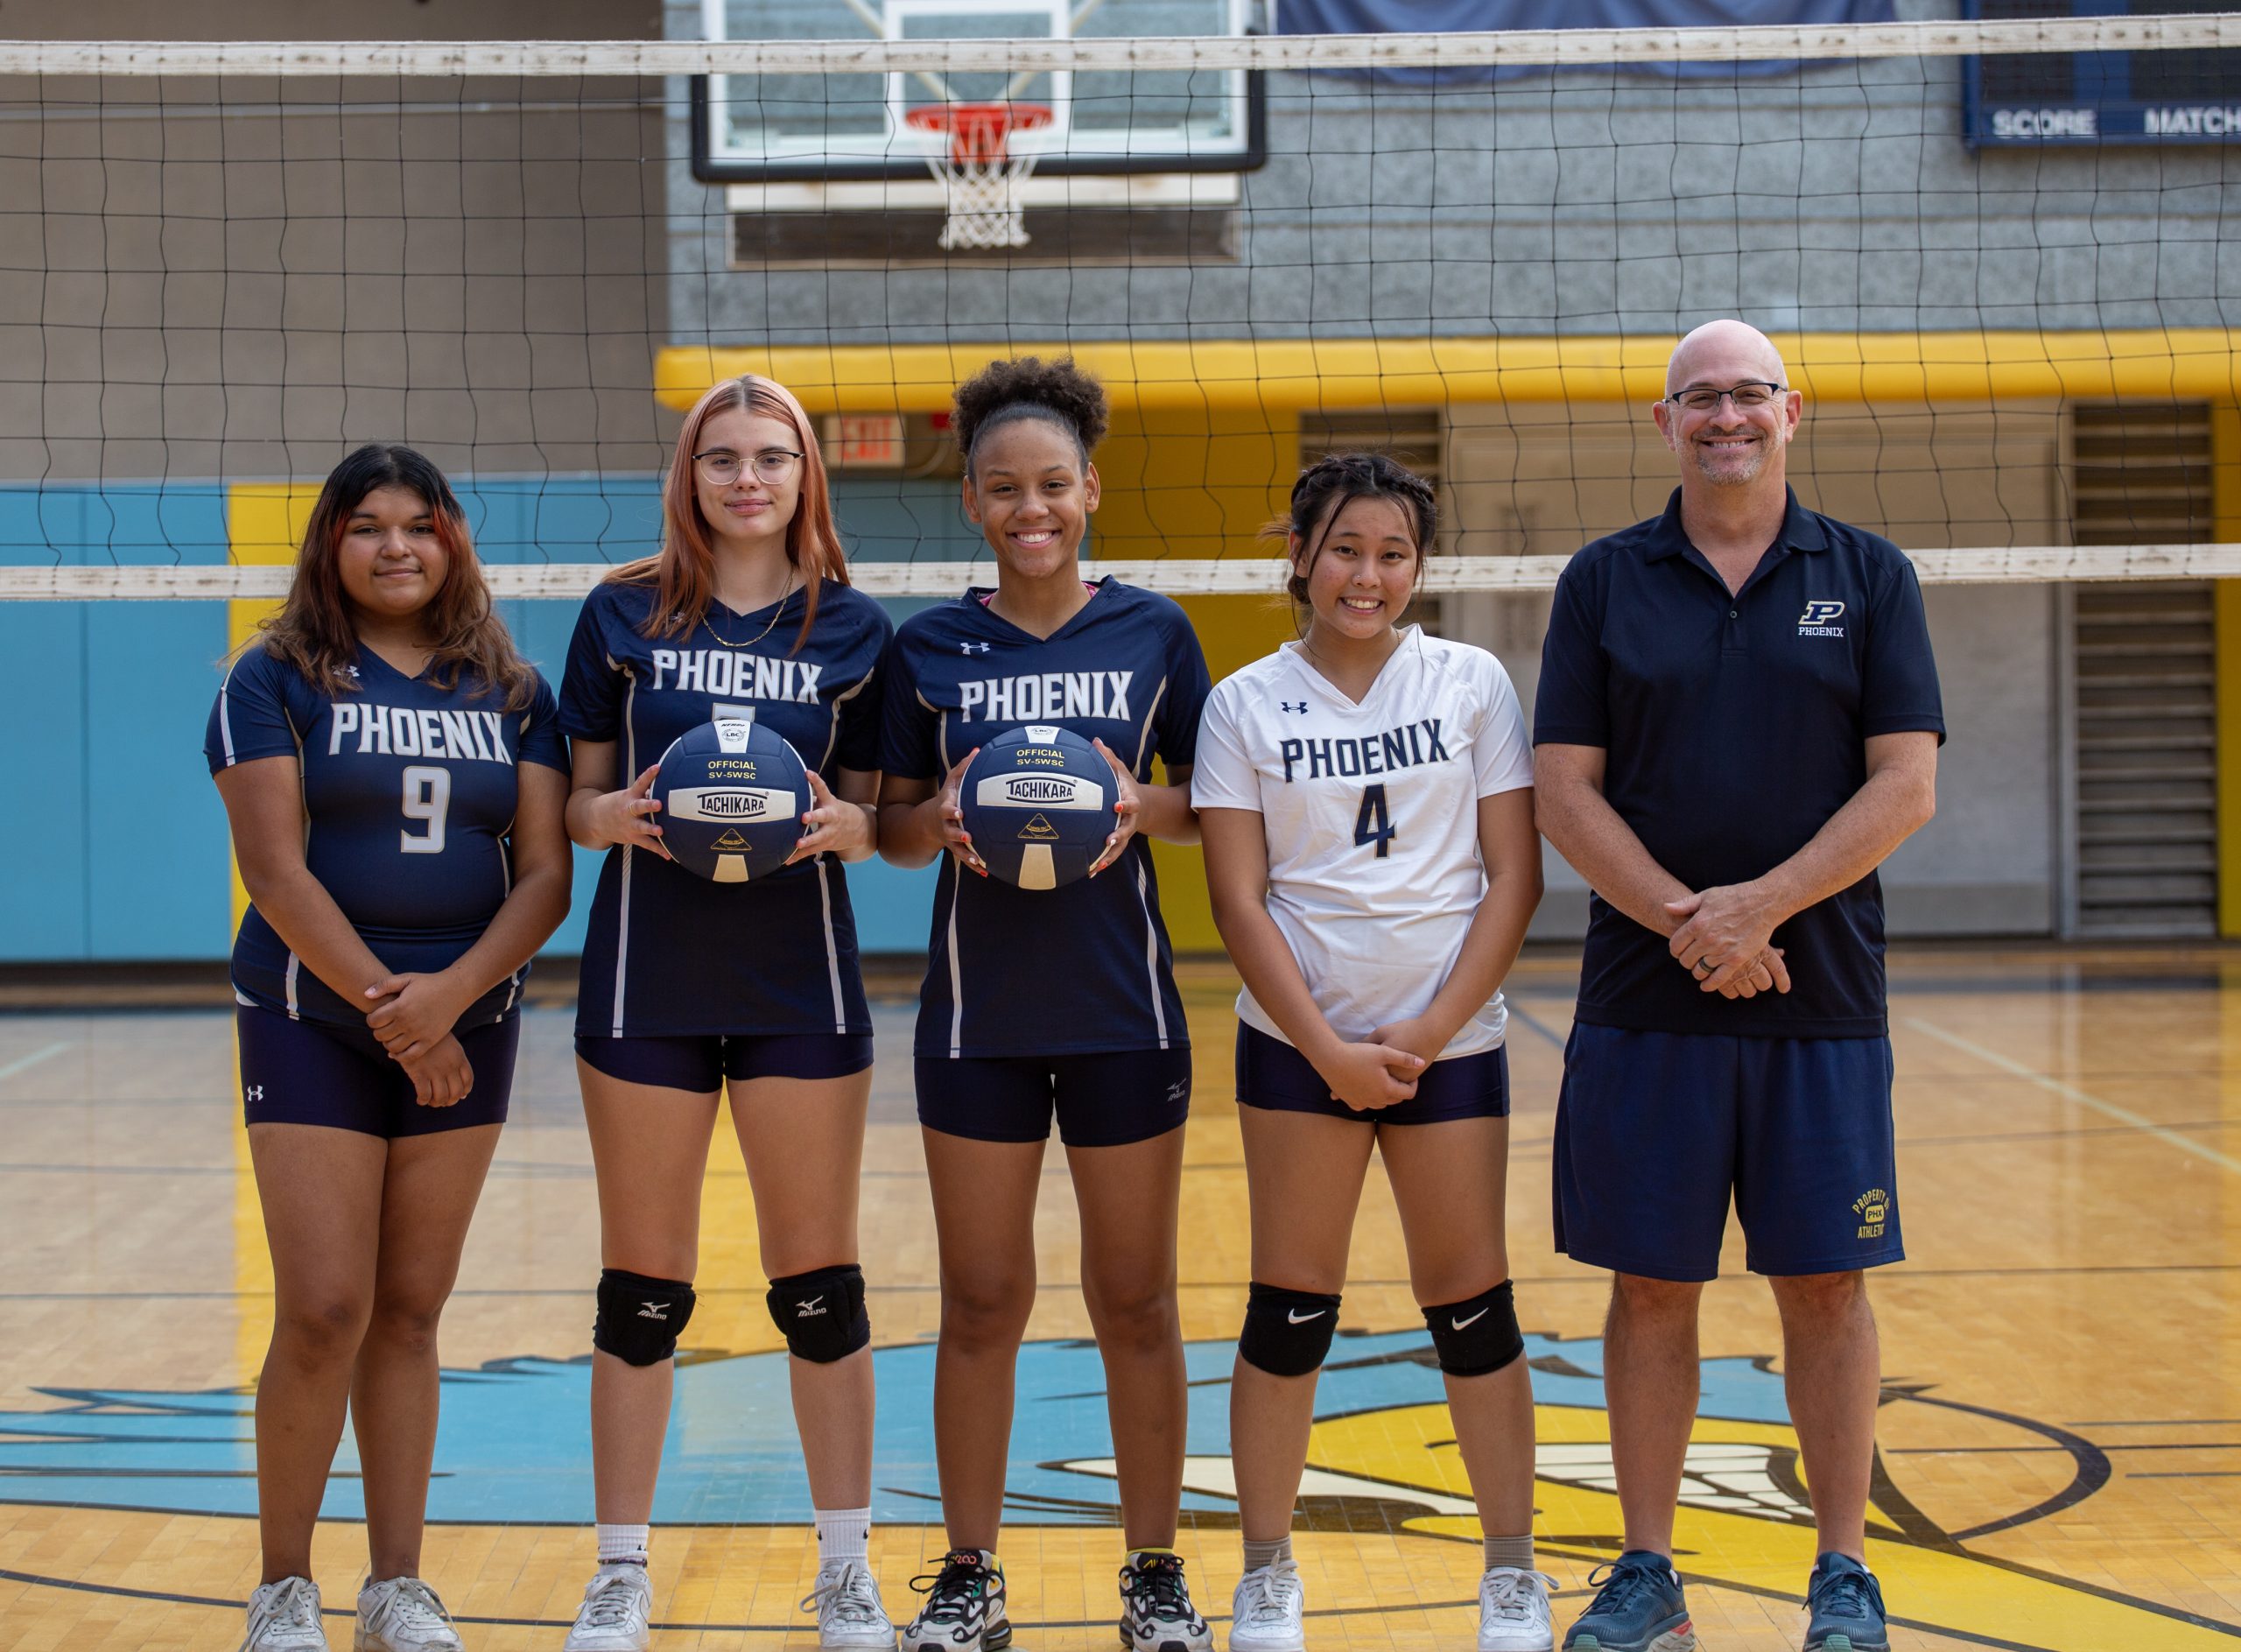 An image of four HS volleyball players and the coach posing for a photo.